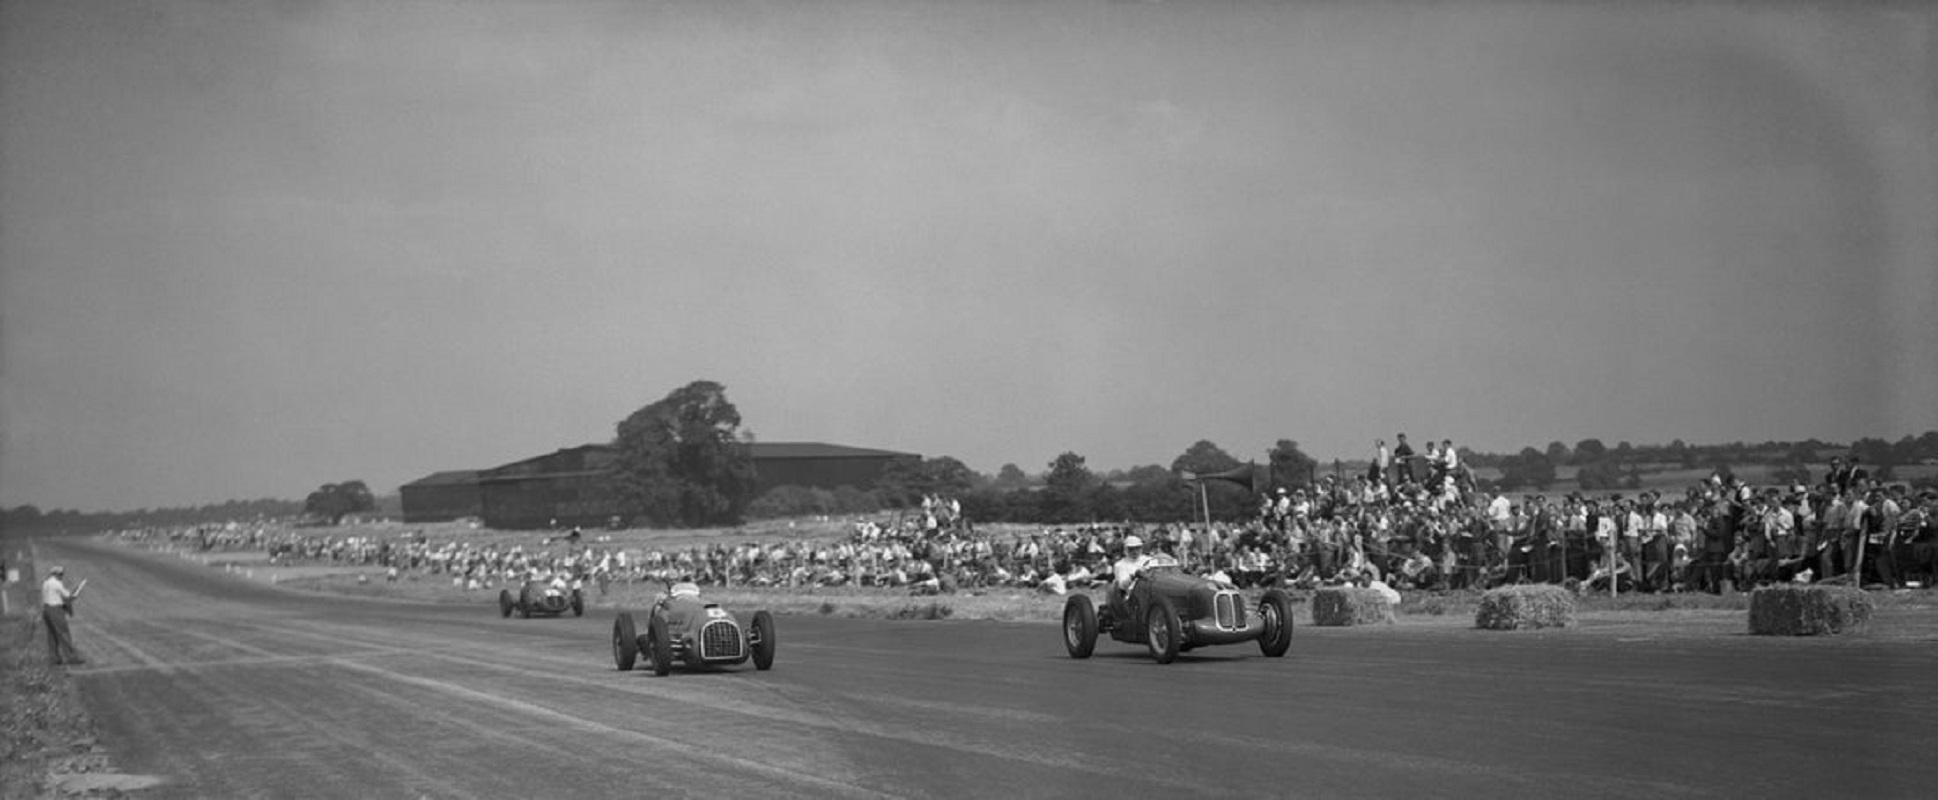 "Ascari At Silverstone" by Express

25th August 1949: Italian motor racing driver Alberto Ascari (left) approaching Stowe Corner in a Ferrari during the Daily Express Motor Rally at Silverstone, UK.

Unframed
Paper Size: 30" x 40'' (inches)
Printed